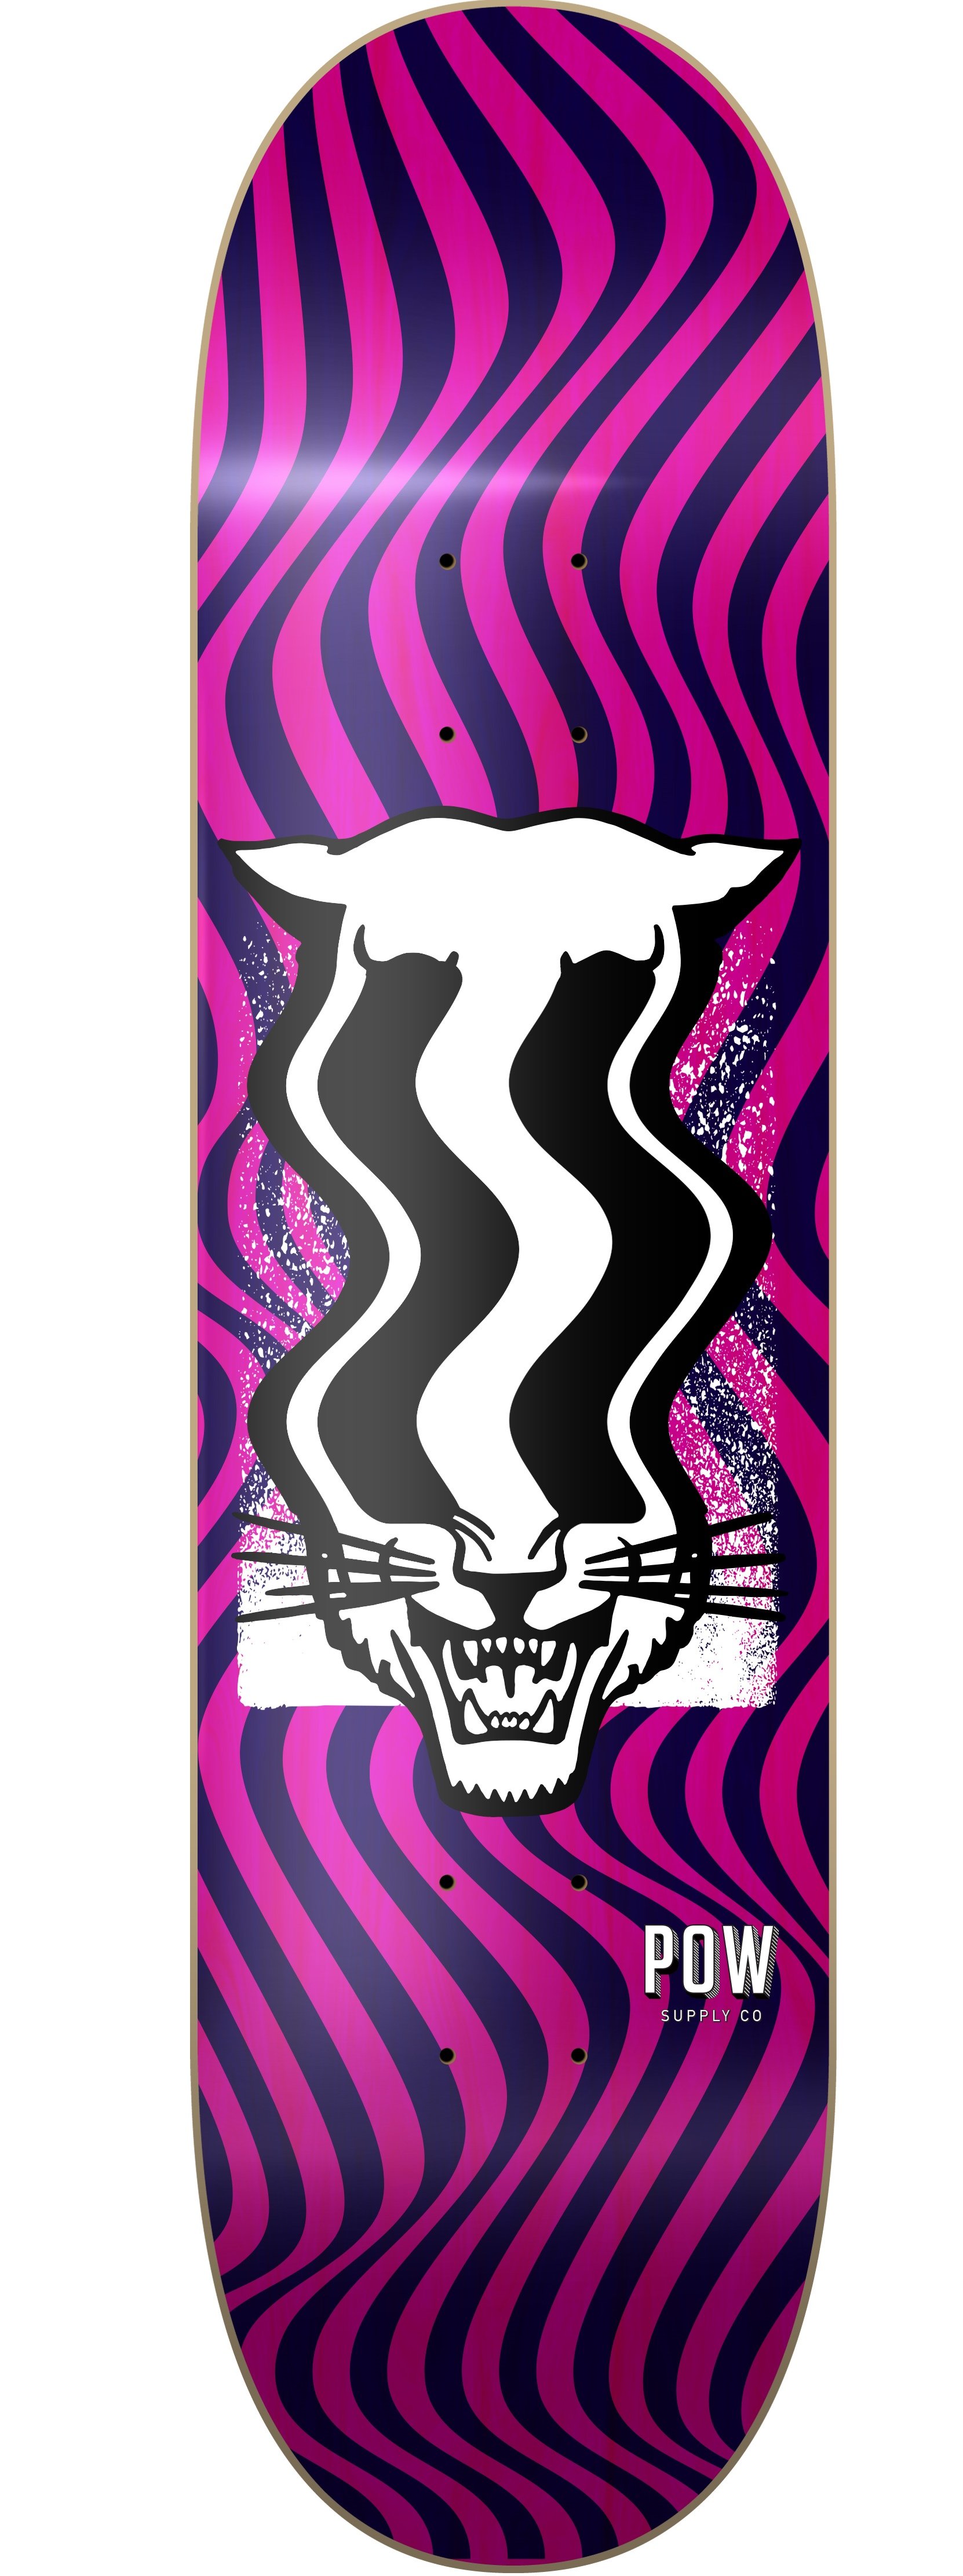 Pow Supply Co 8,0 Tiger Candy Deck